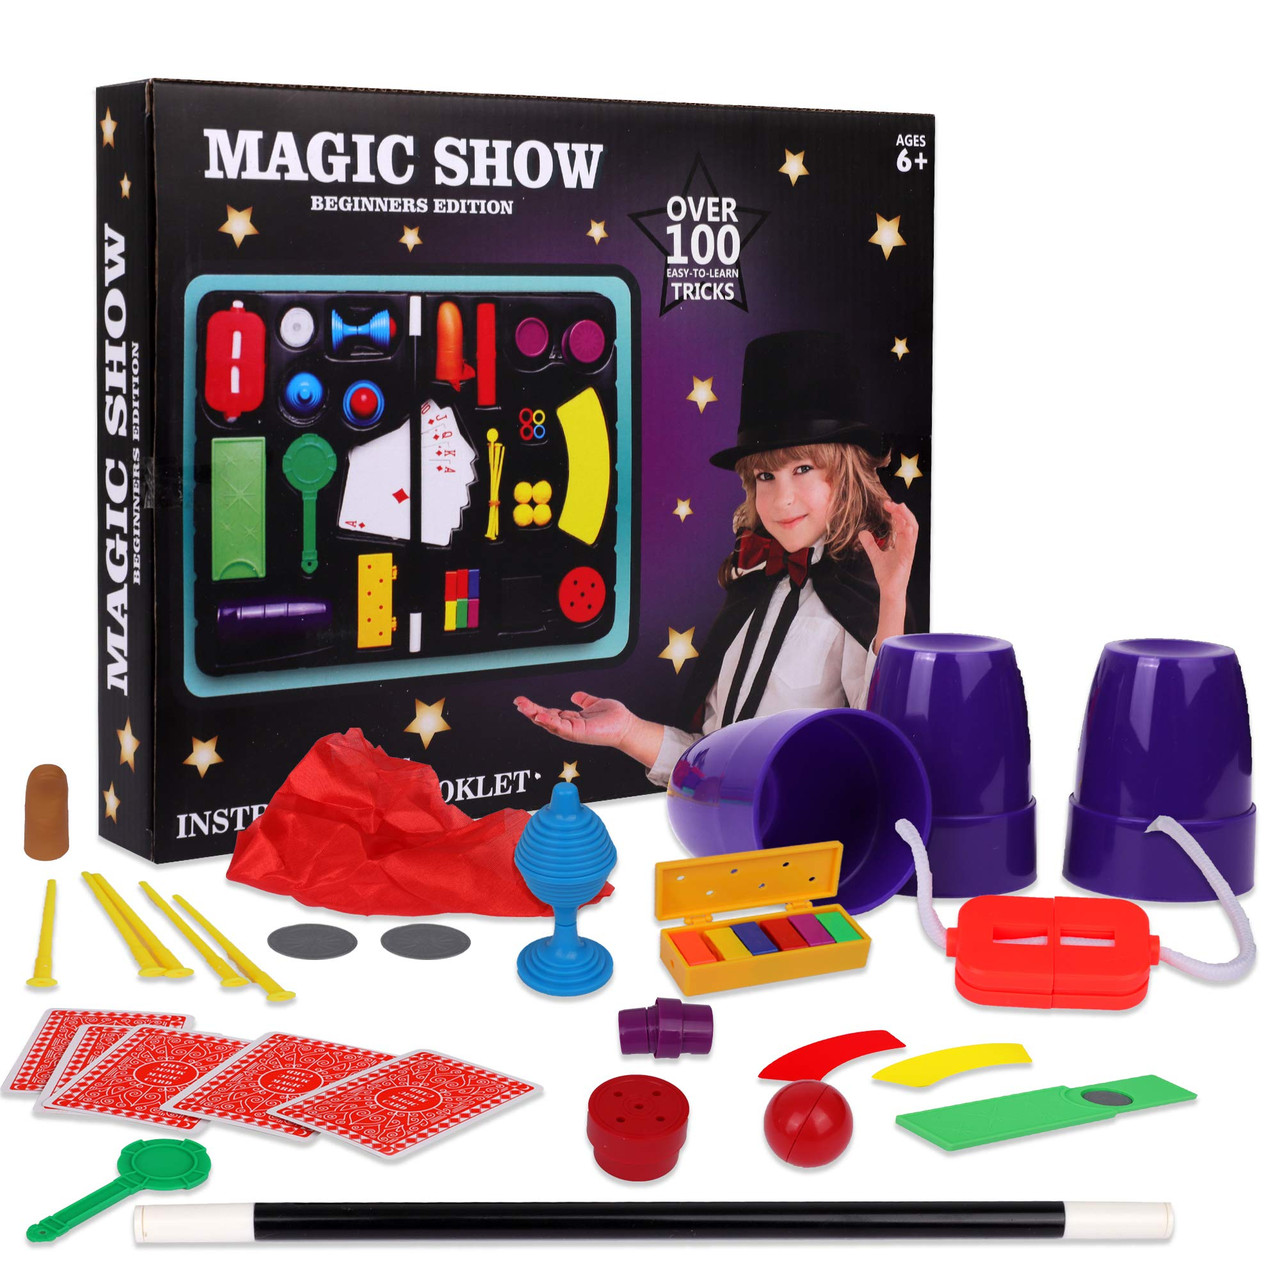 Playkidz Magic Trick for Kids Set 2- Magic Set with Over 35 Tricks Made  Simple, Magician Pretend Play Set with Wand & More Magic Tricks - Easy to  Learn Instruction Manual 